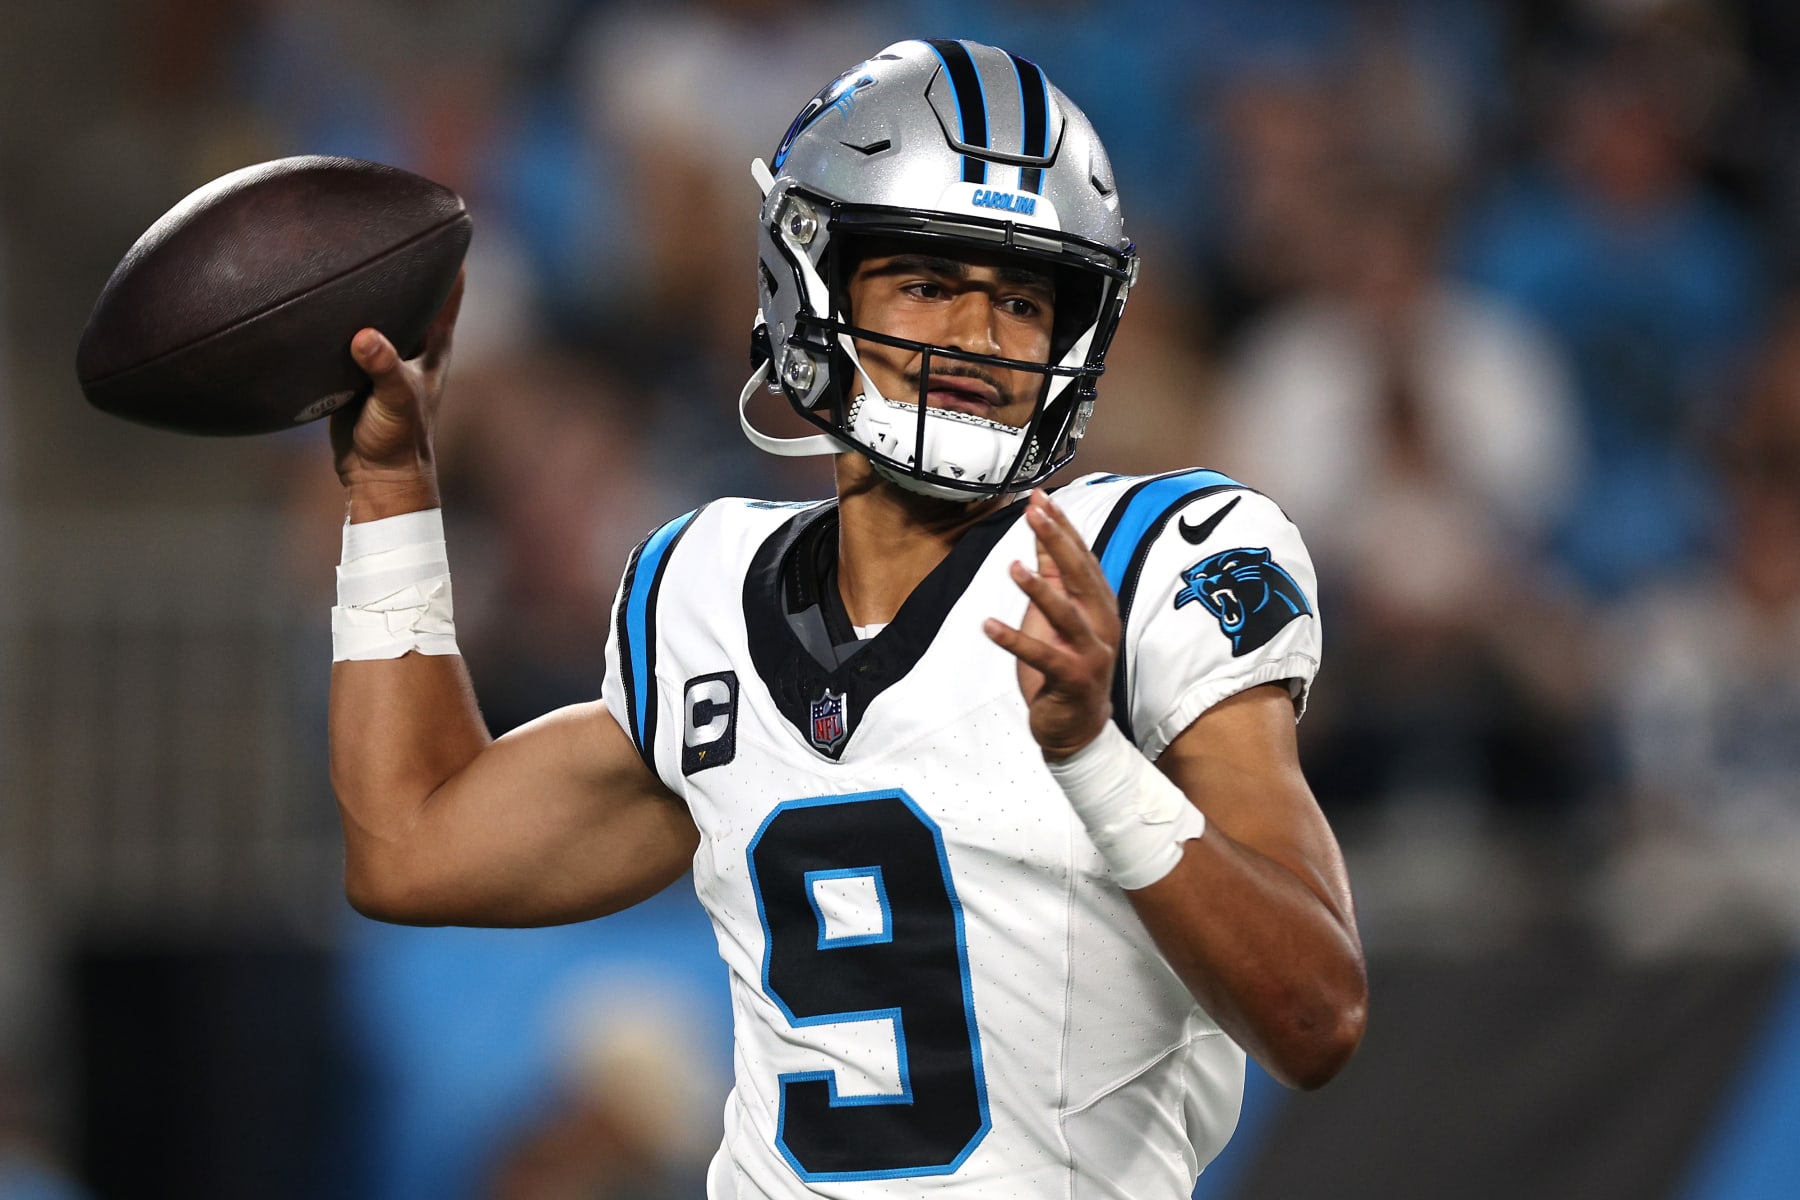 Carolina Panthers growing pains rear their ugly head in Week 1 loss